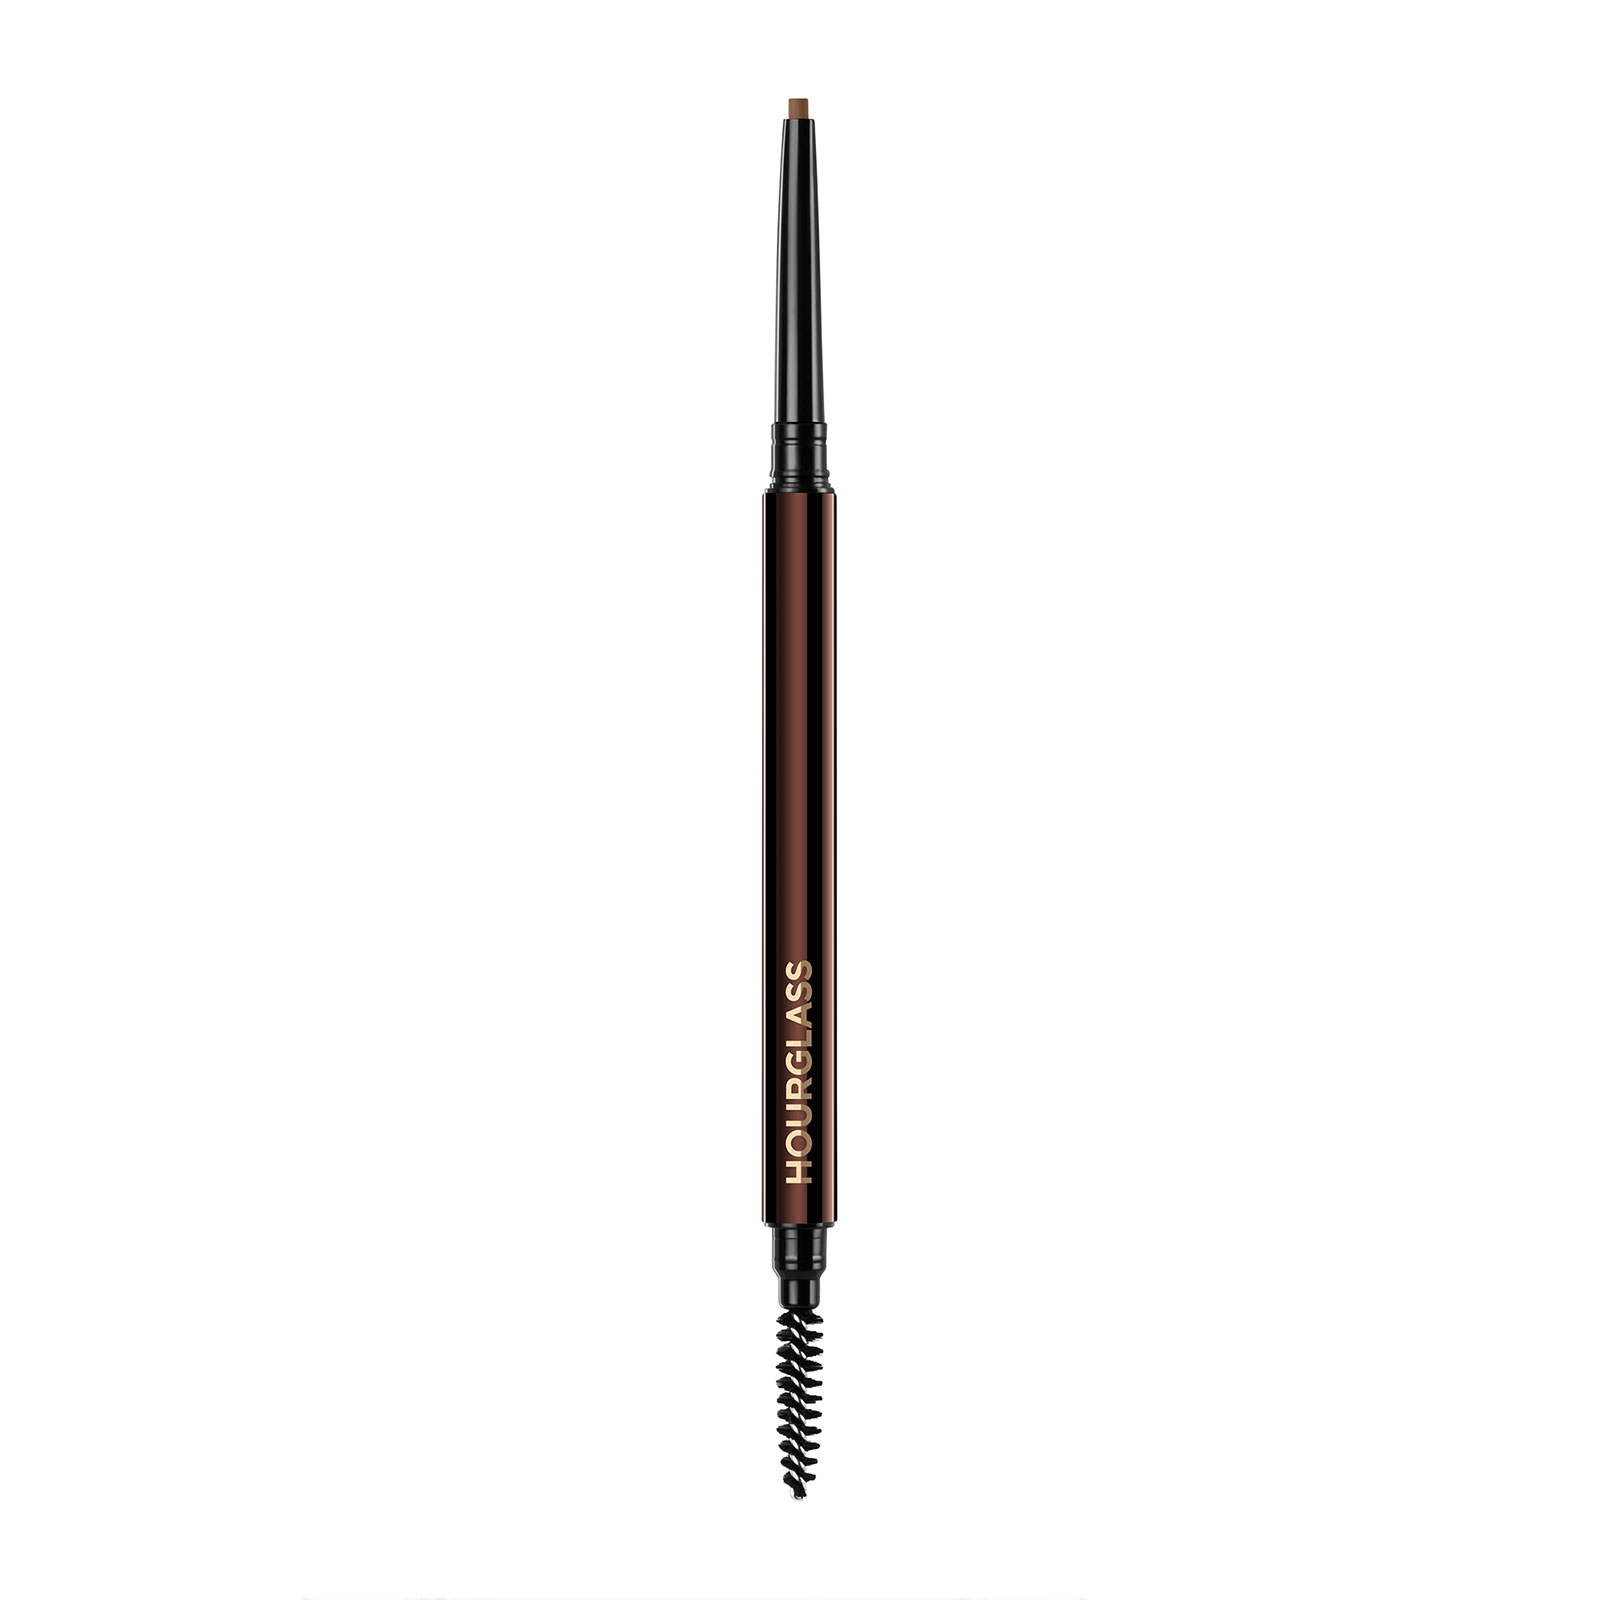 Hourglass Arch Brow Micro Sculpting Pencil 0.4G Blonde